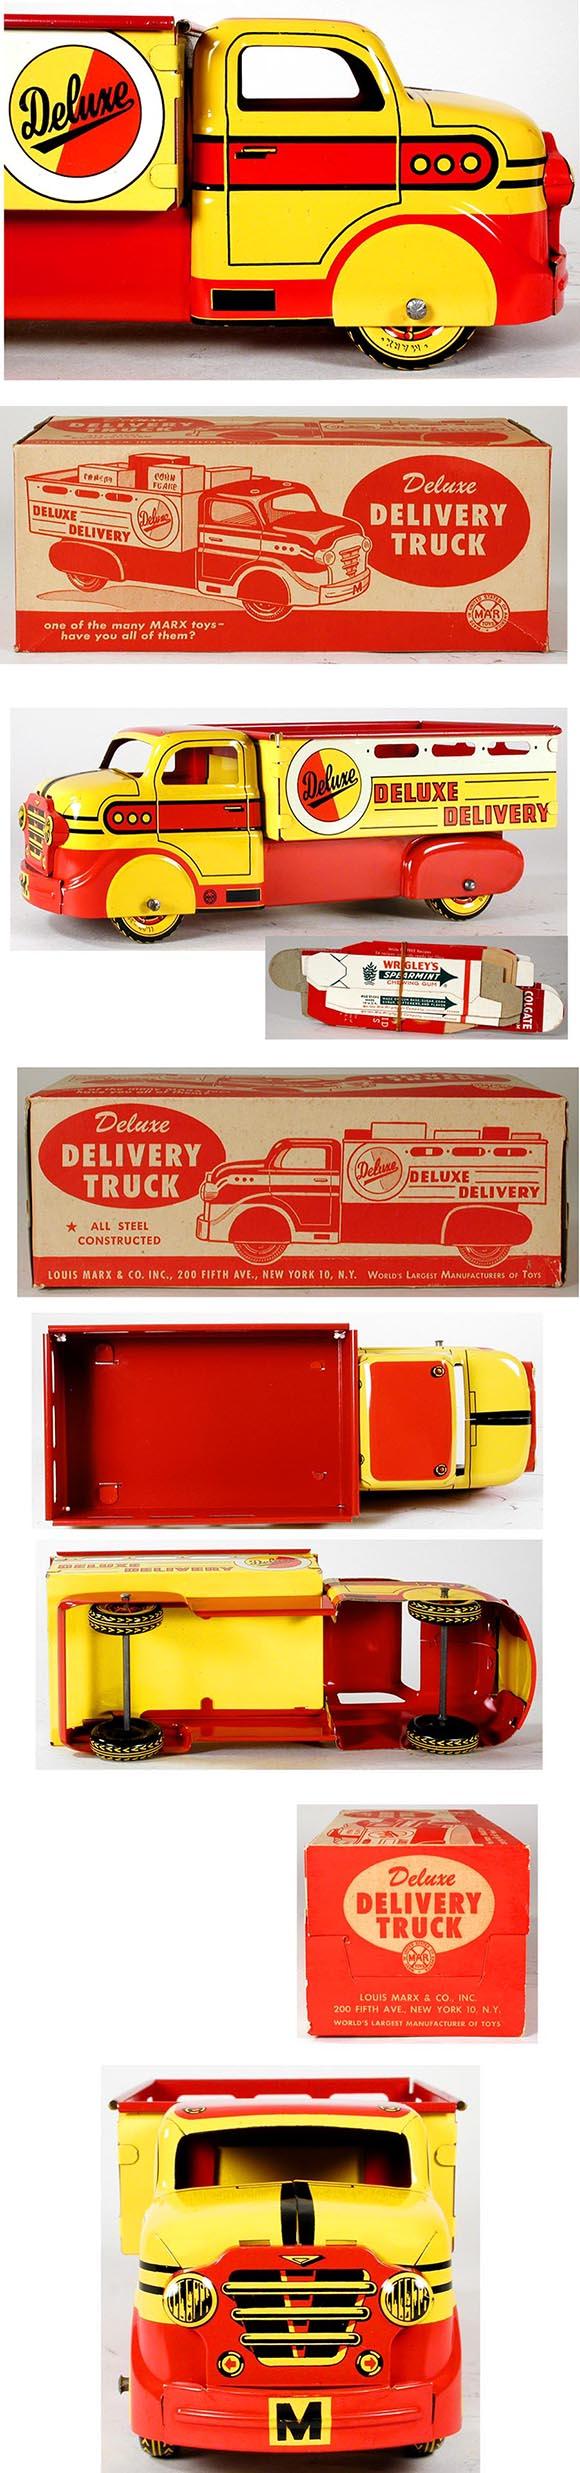 1952 Marx, Deluxe Delivery Truck with Products in Original Box